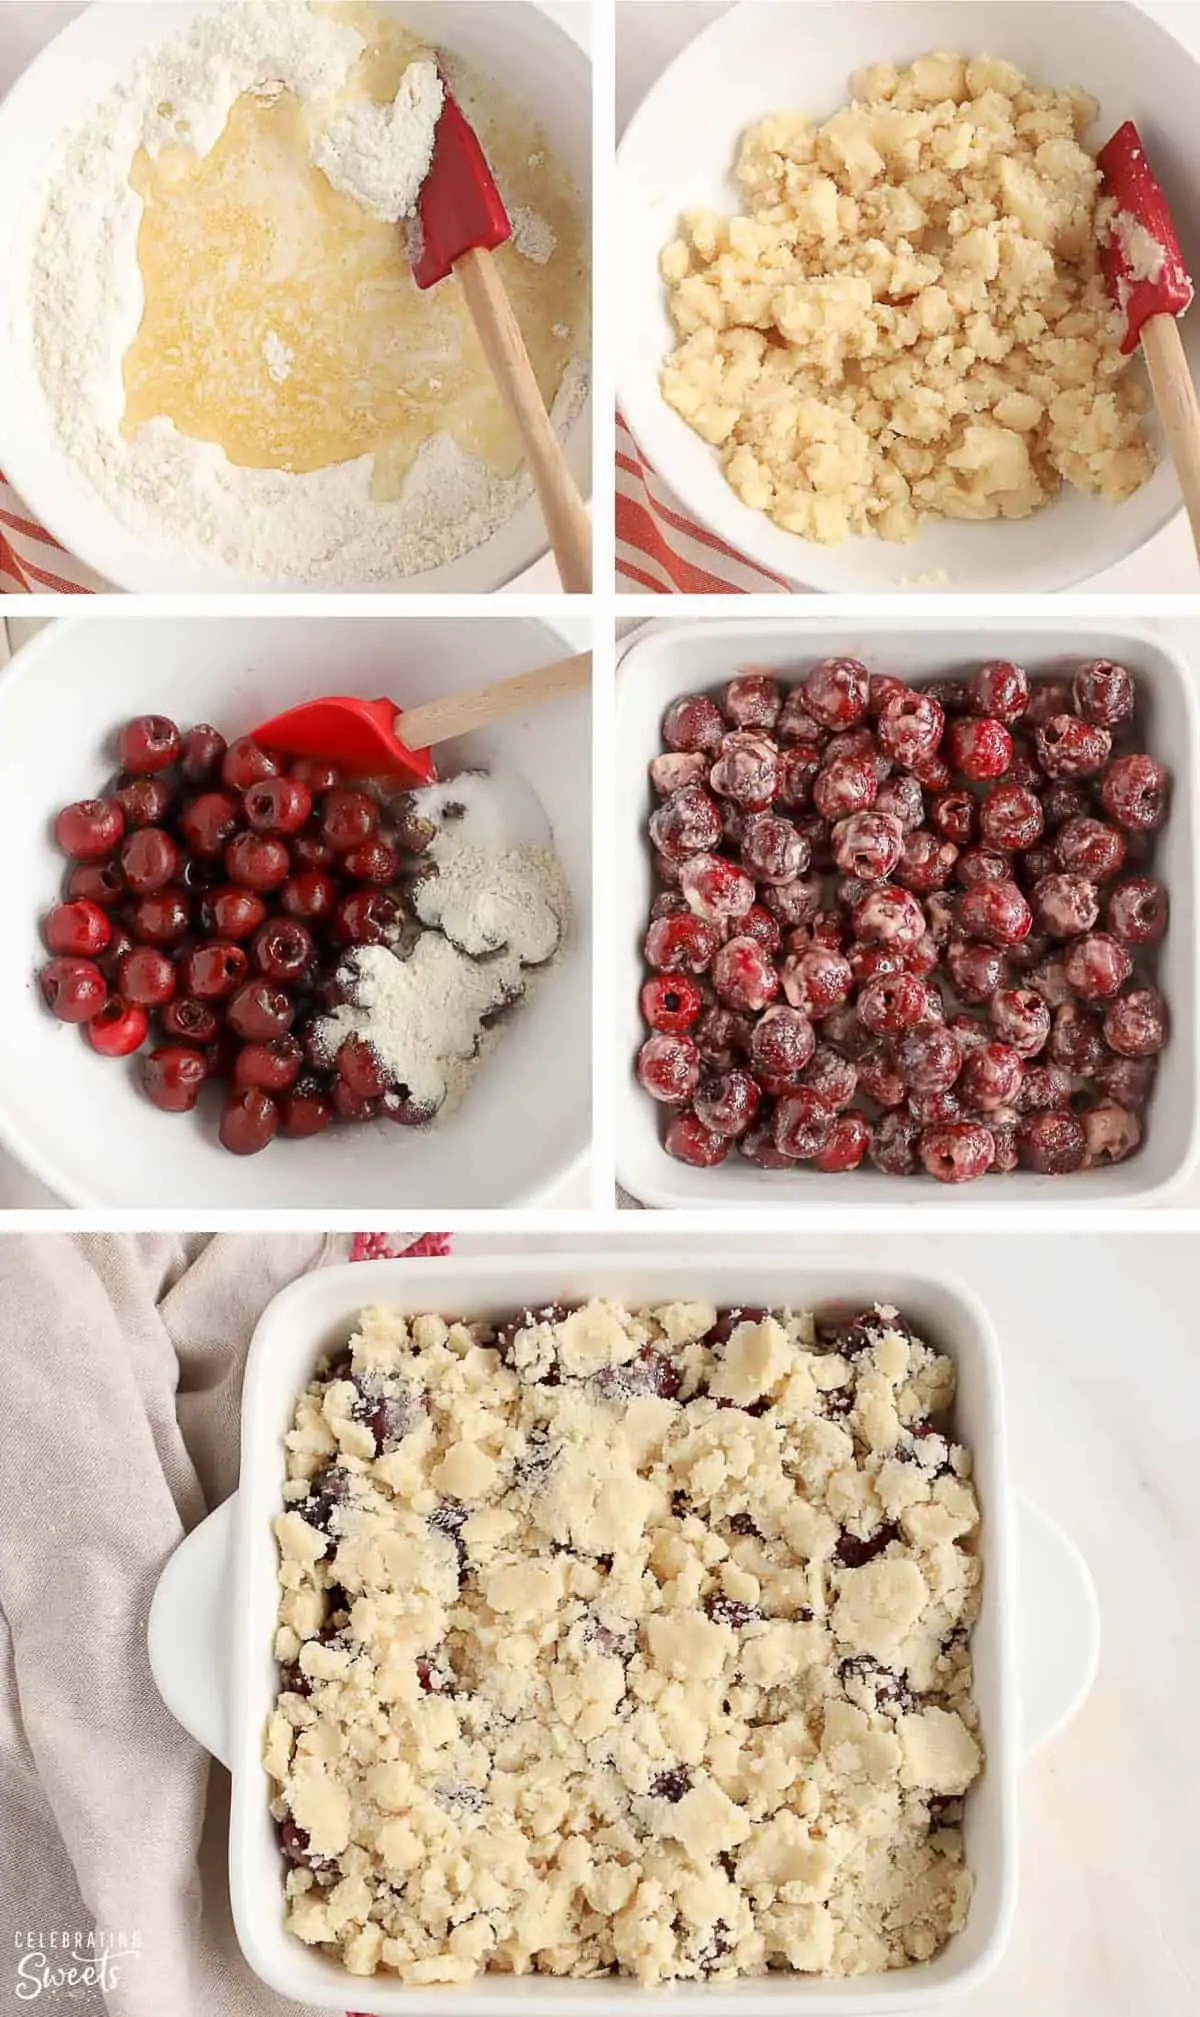 Cherry cobbler step by step recipe photo collage: cobbler topping in a bowl, cherry filling in a bowl, uncooked cobbler in a baking dish.